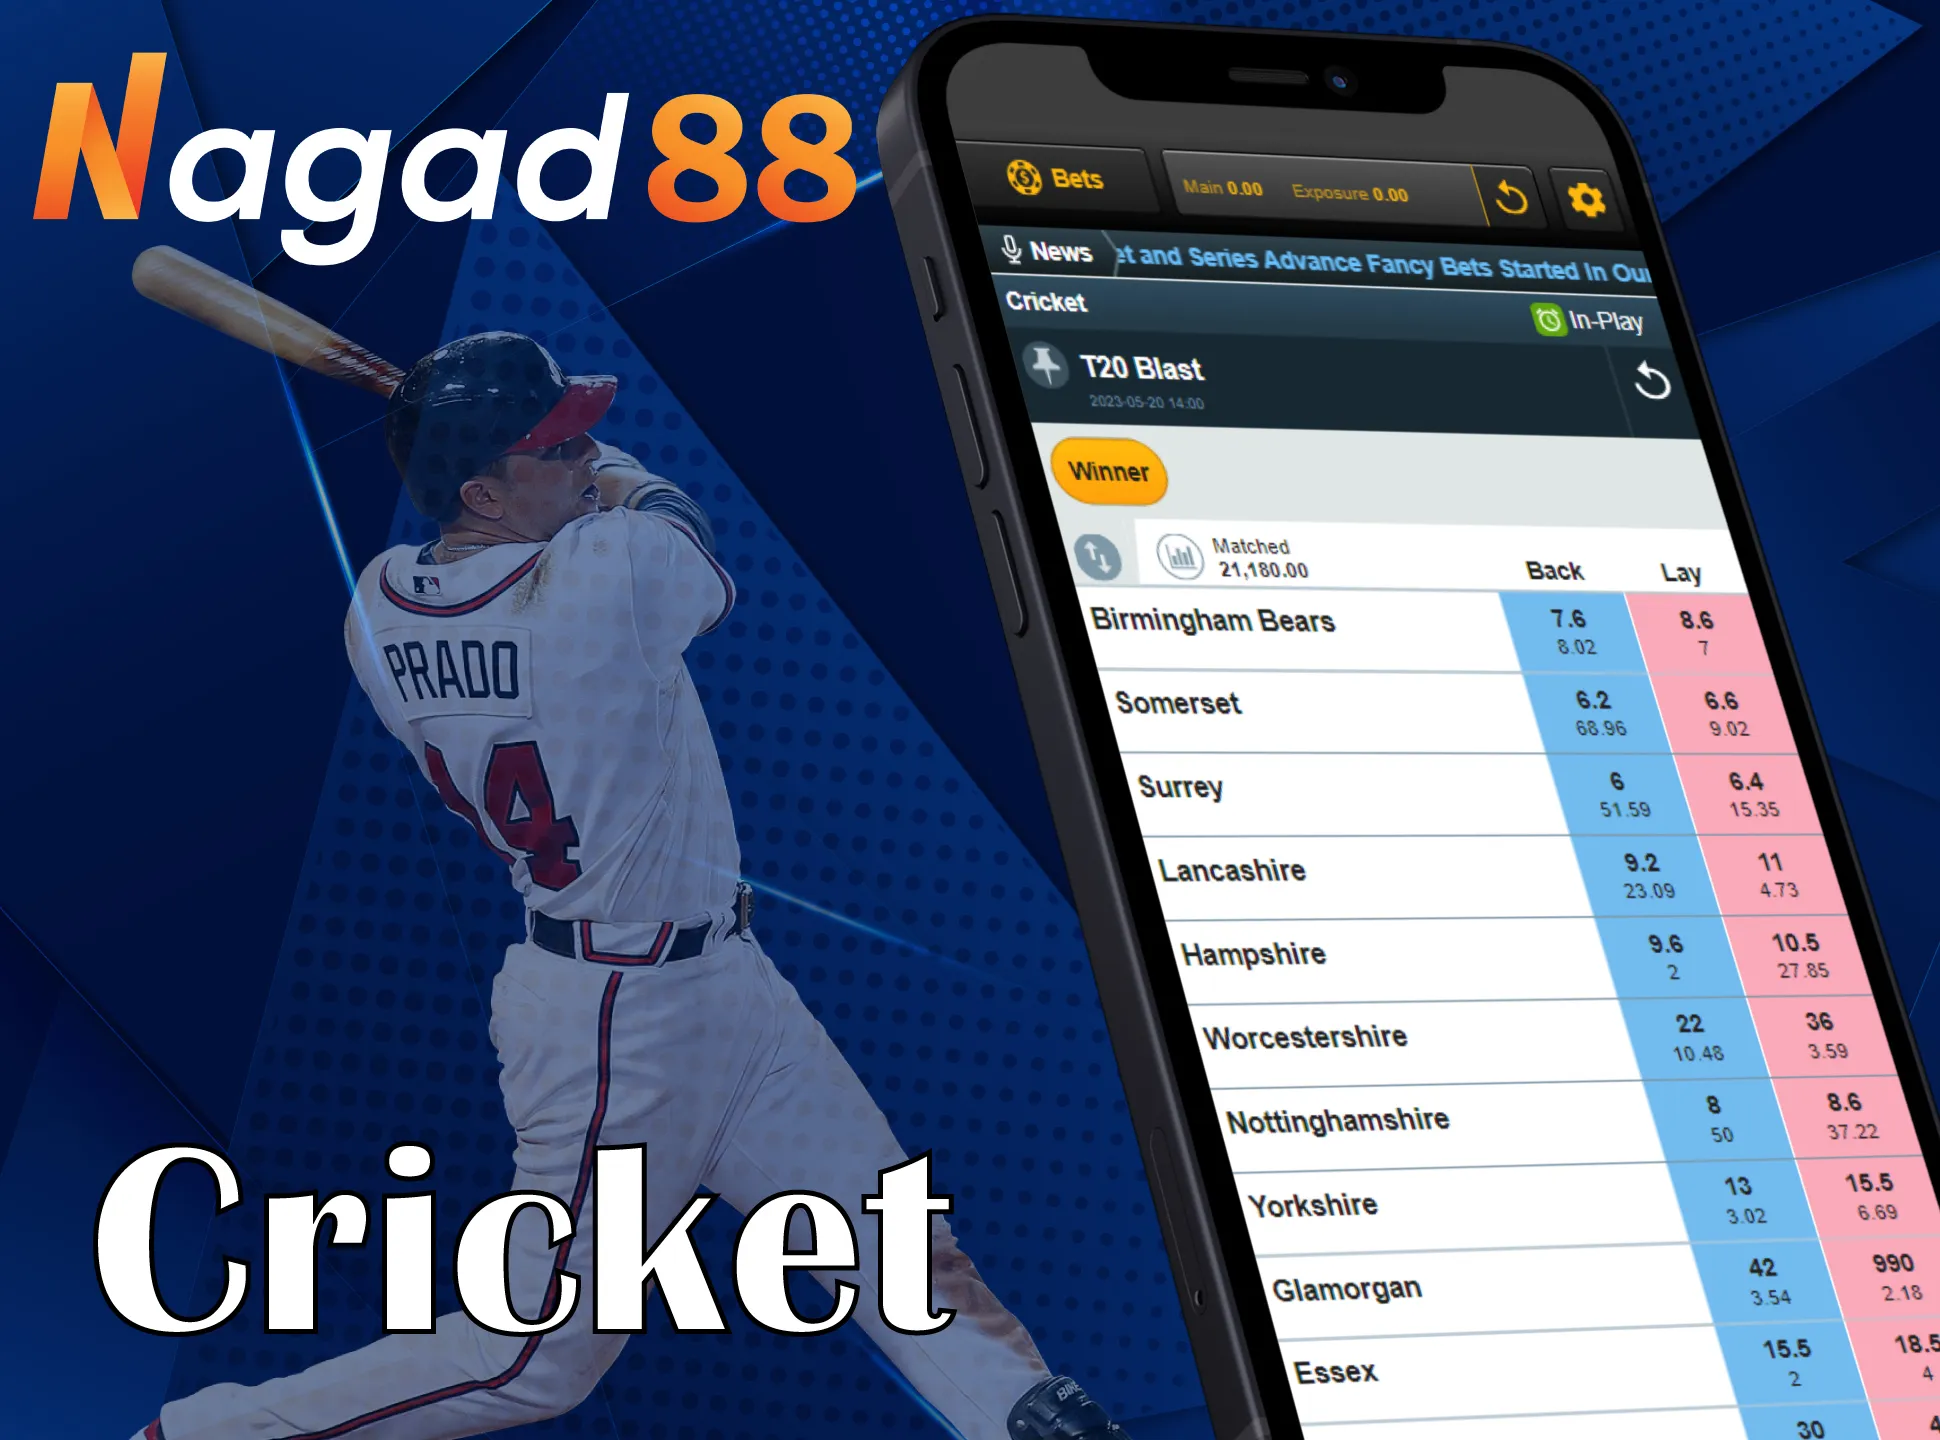 Place cricket bets in the Nagad88 app.